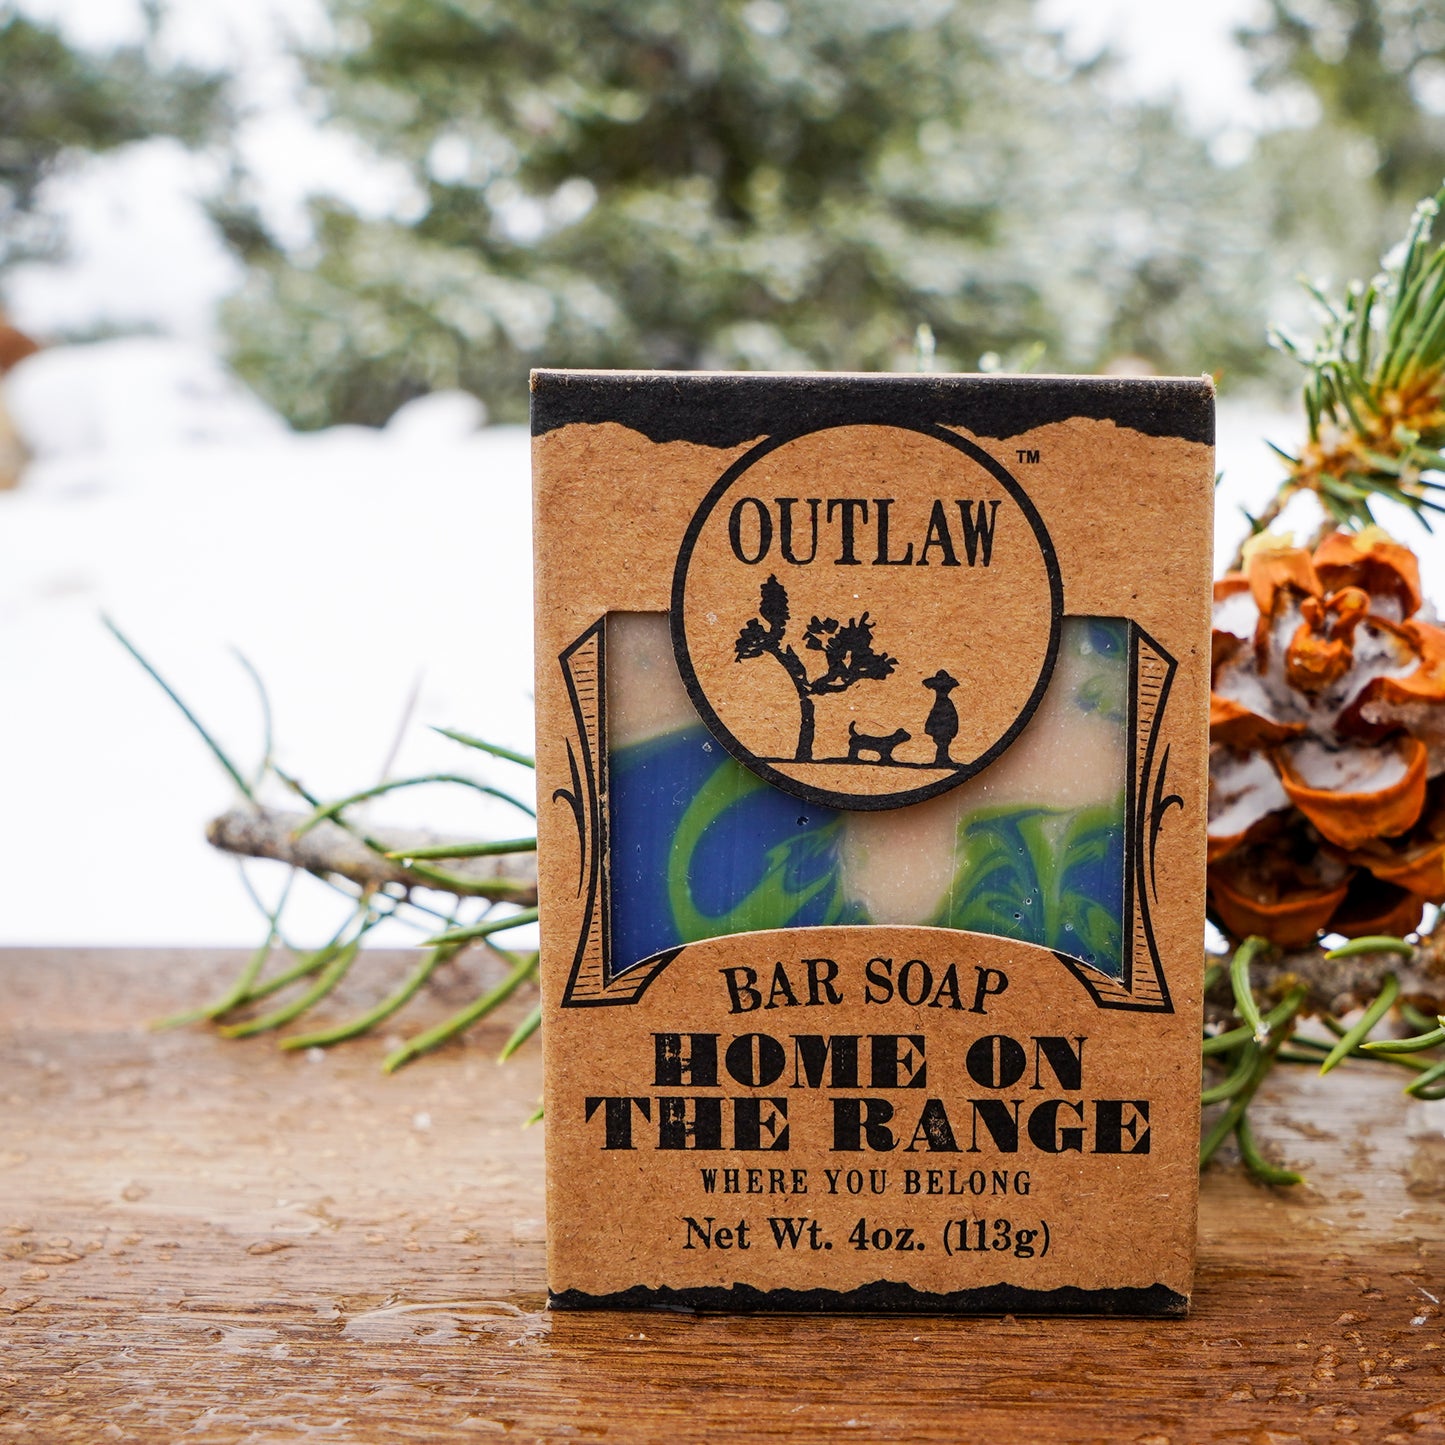 Outlaw Home on the Range Bar Soap